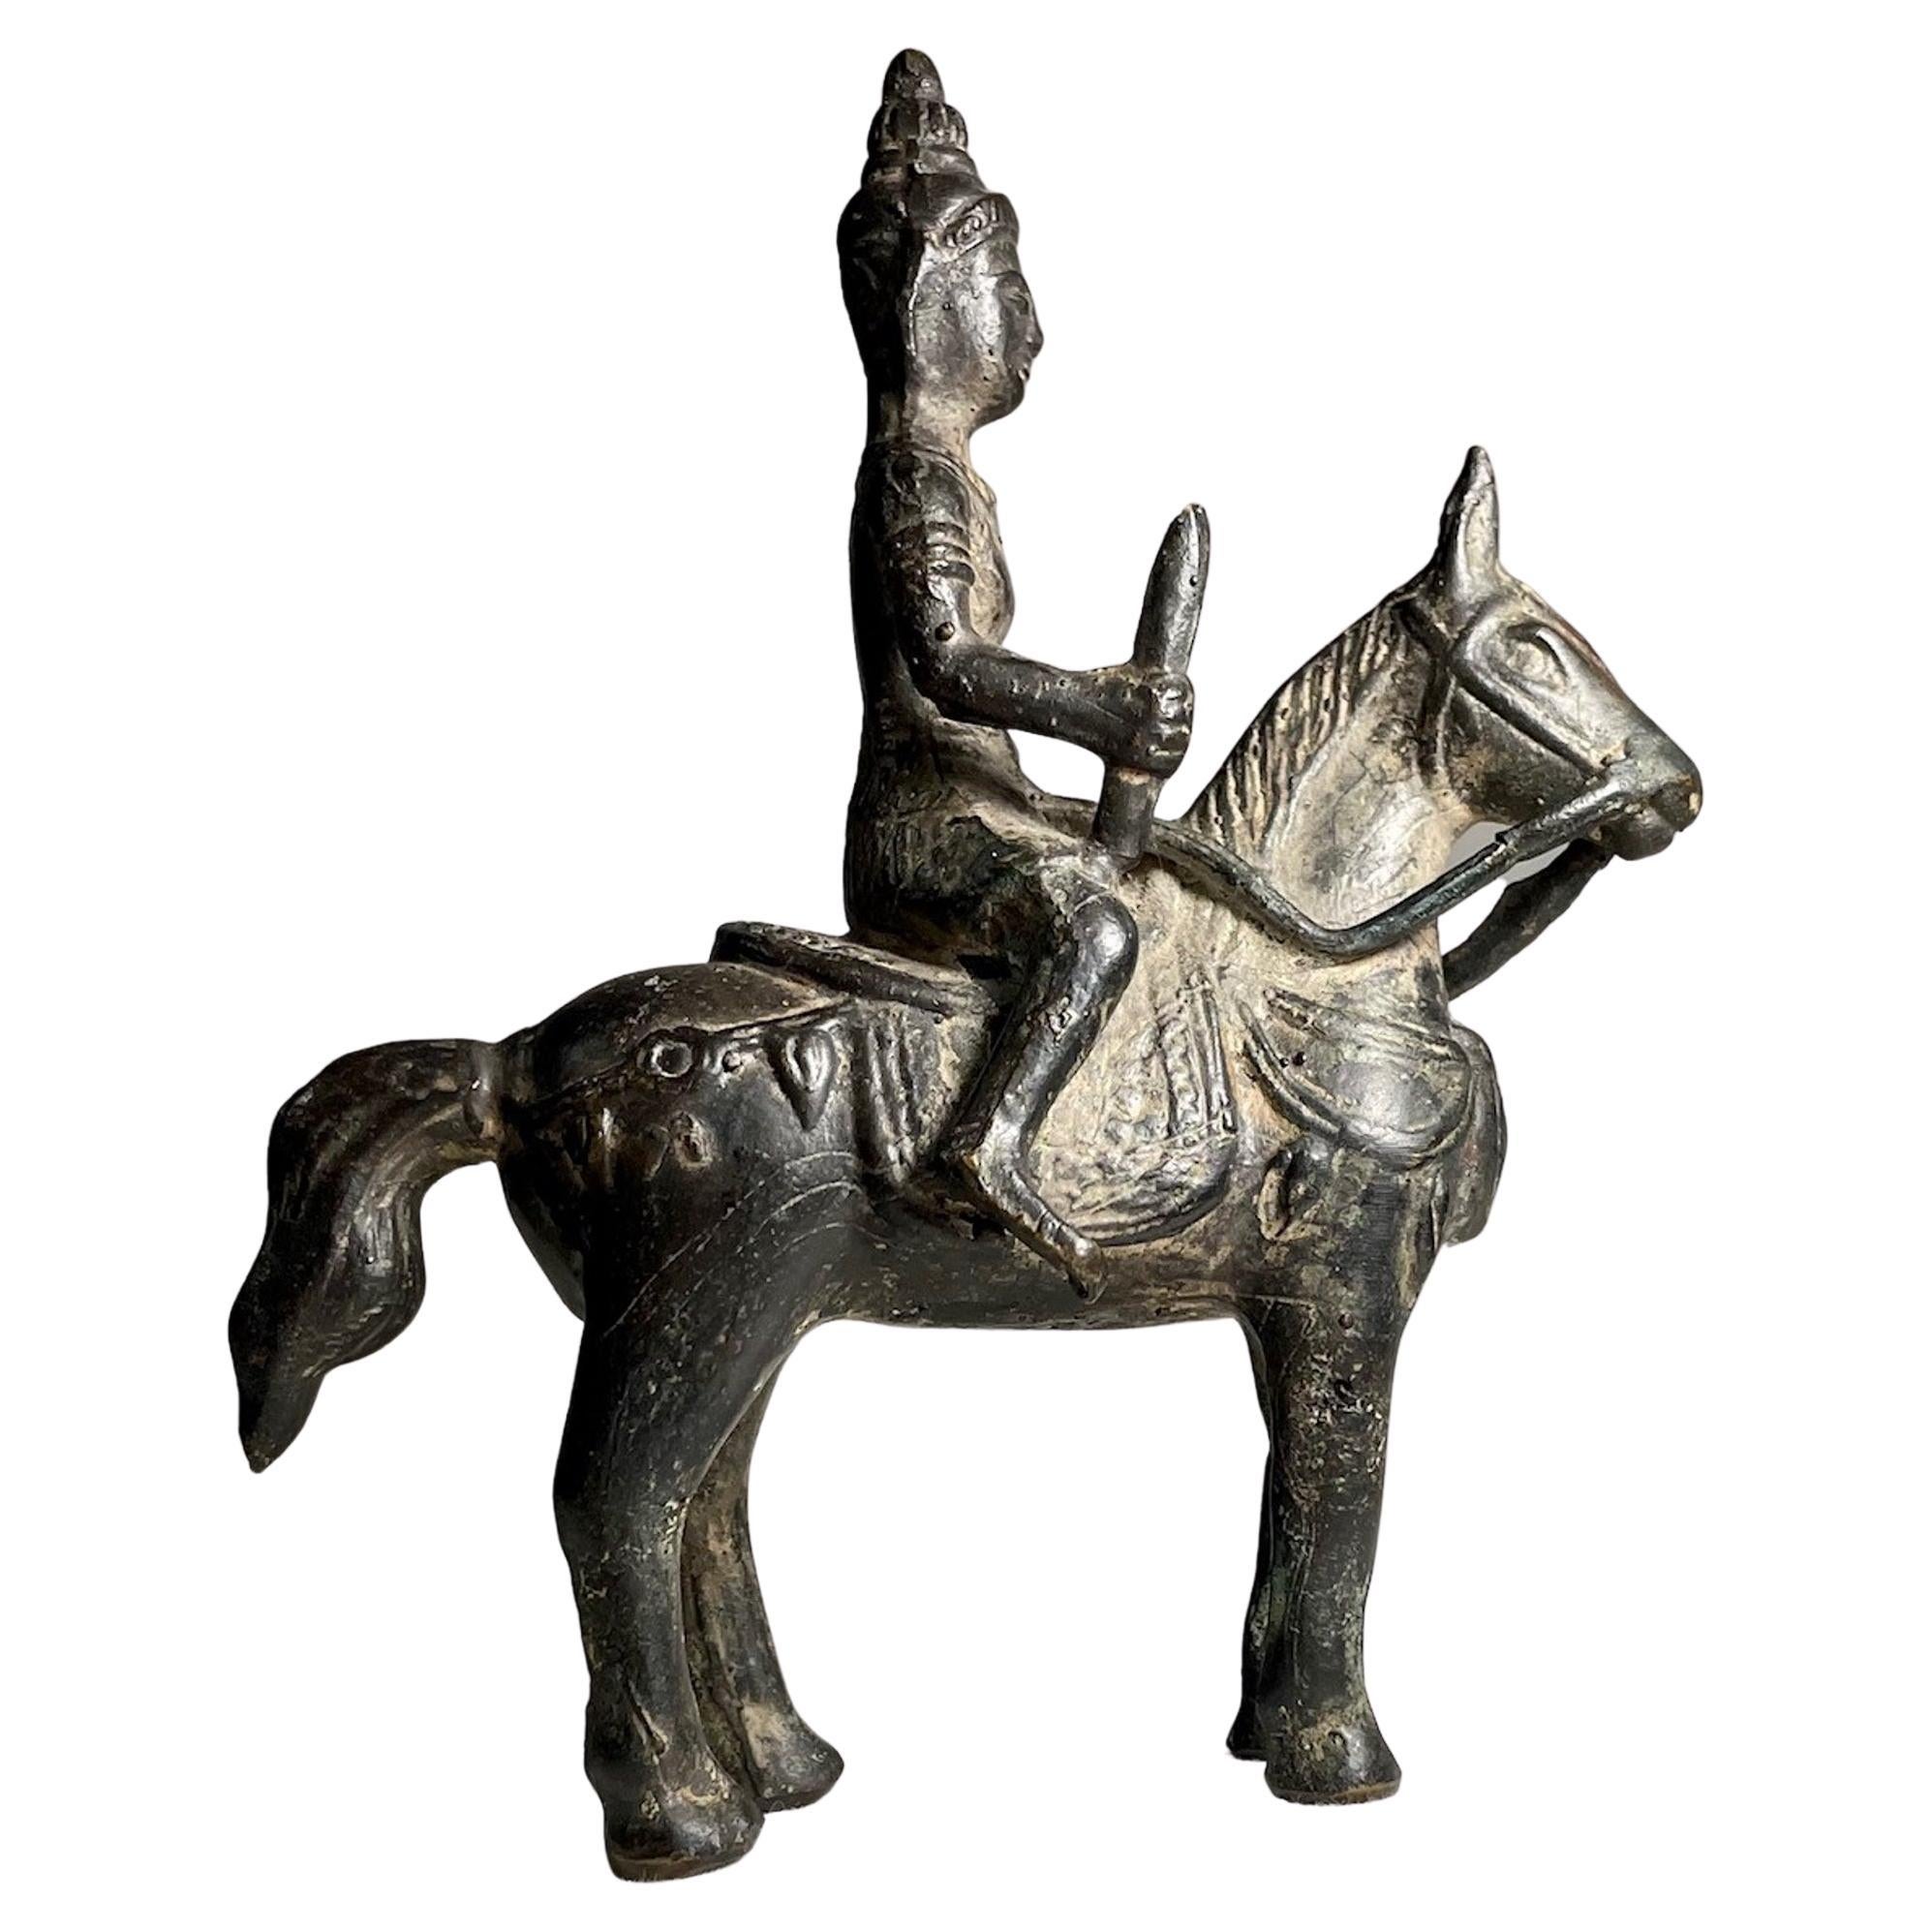 Indian Hindu bronze sculpture of Khandoba 17th/18th century

The bronze figure on horseback represents the most popular
Hindu deity Khandoba, an avatar of Shiva. He is the patron deity
of warriors. The small but magnificent sculpture is cast in